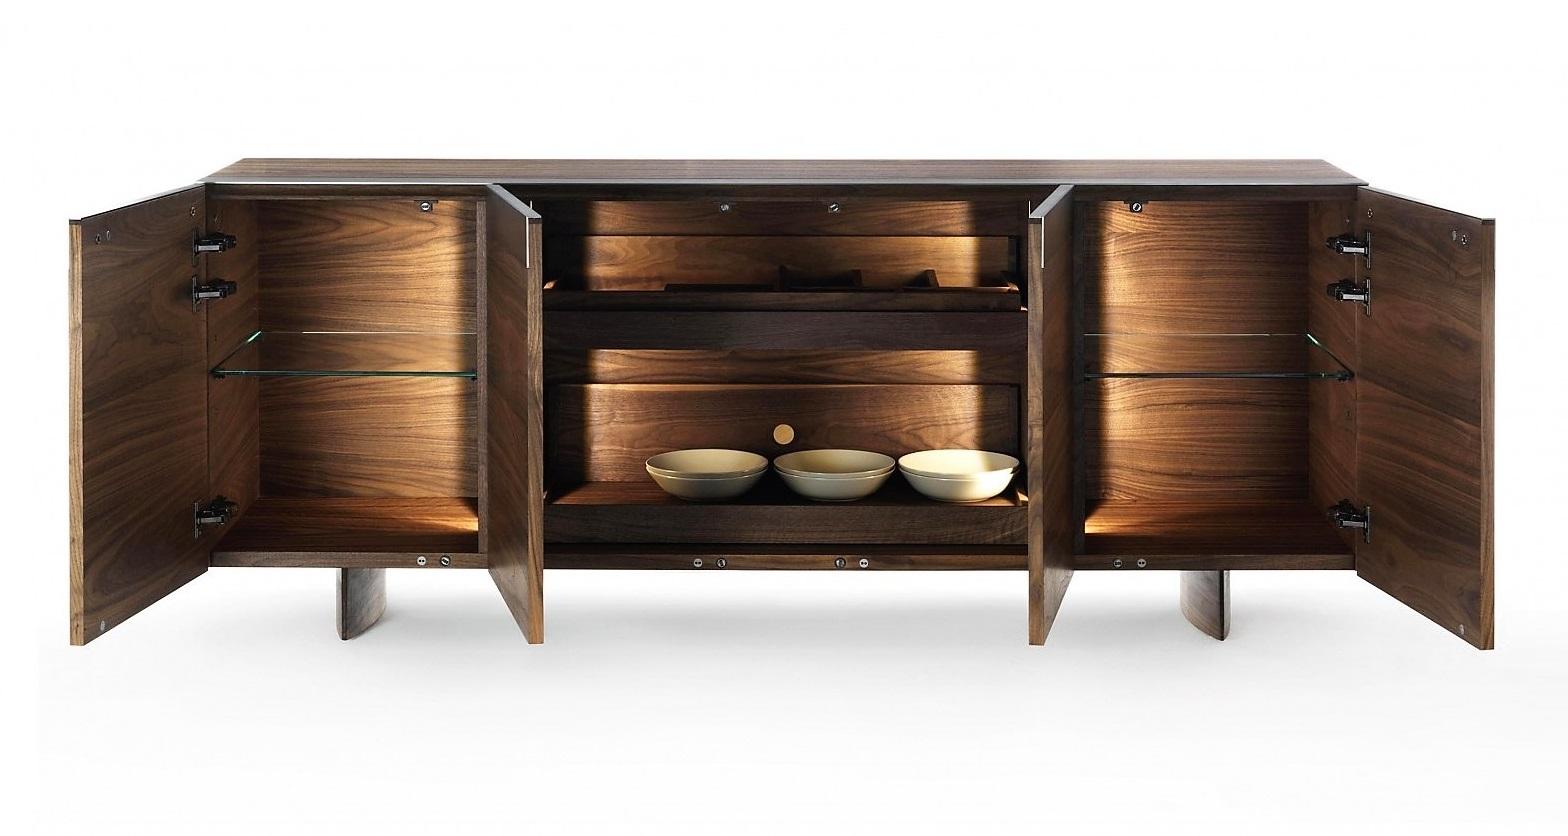 This piece is entirely made in Italy preserving the craftsmanship in the age of technology, with timeless creations which don’t follow short-term trends.
Crafted of solid walnut wood, with doors and pull-out shelves inside. With an original opening